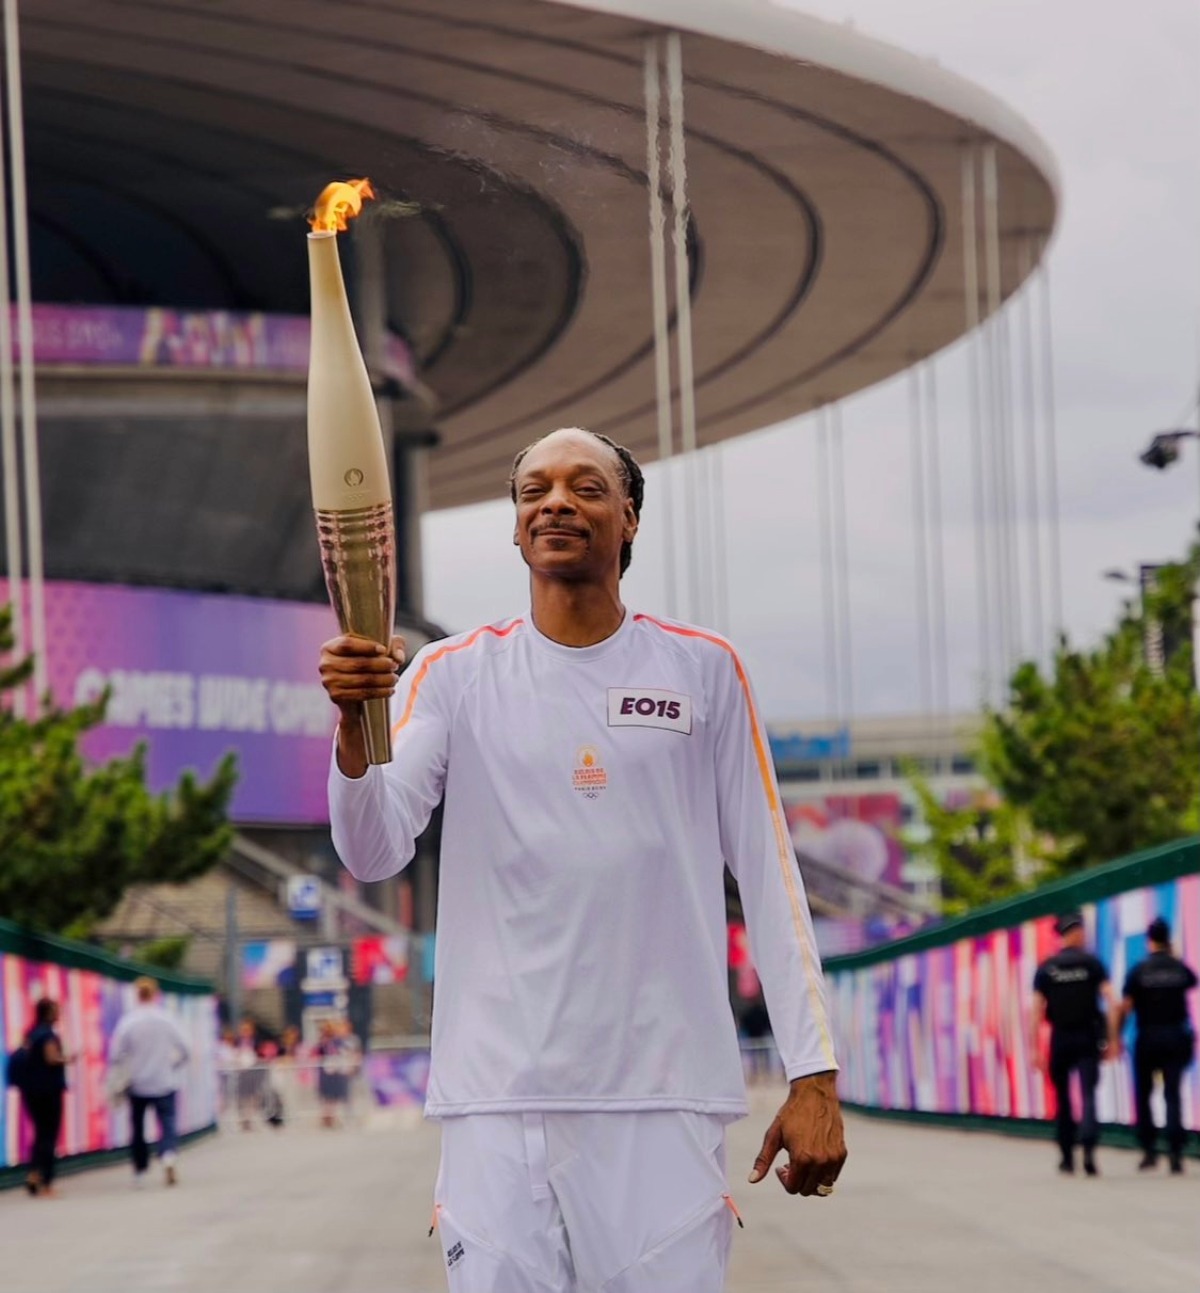 US rapper Snoop Dogg with the Olympic Torch in Paris on Friday